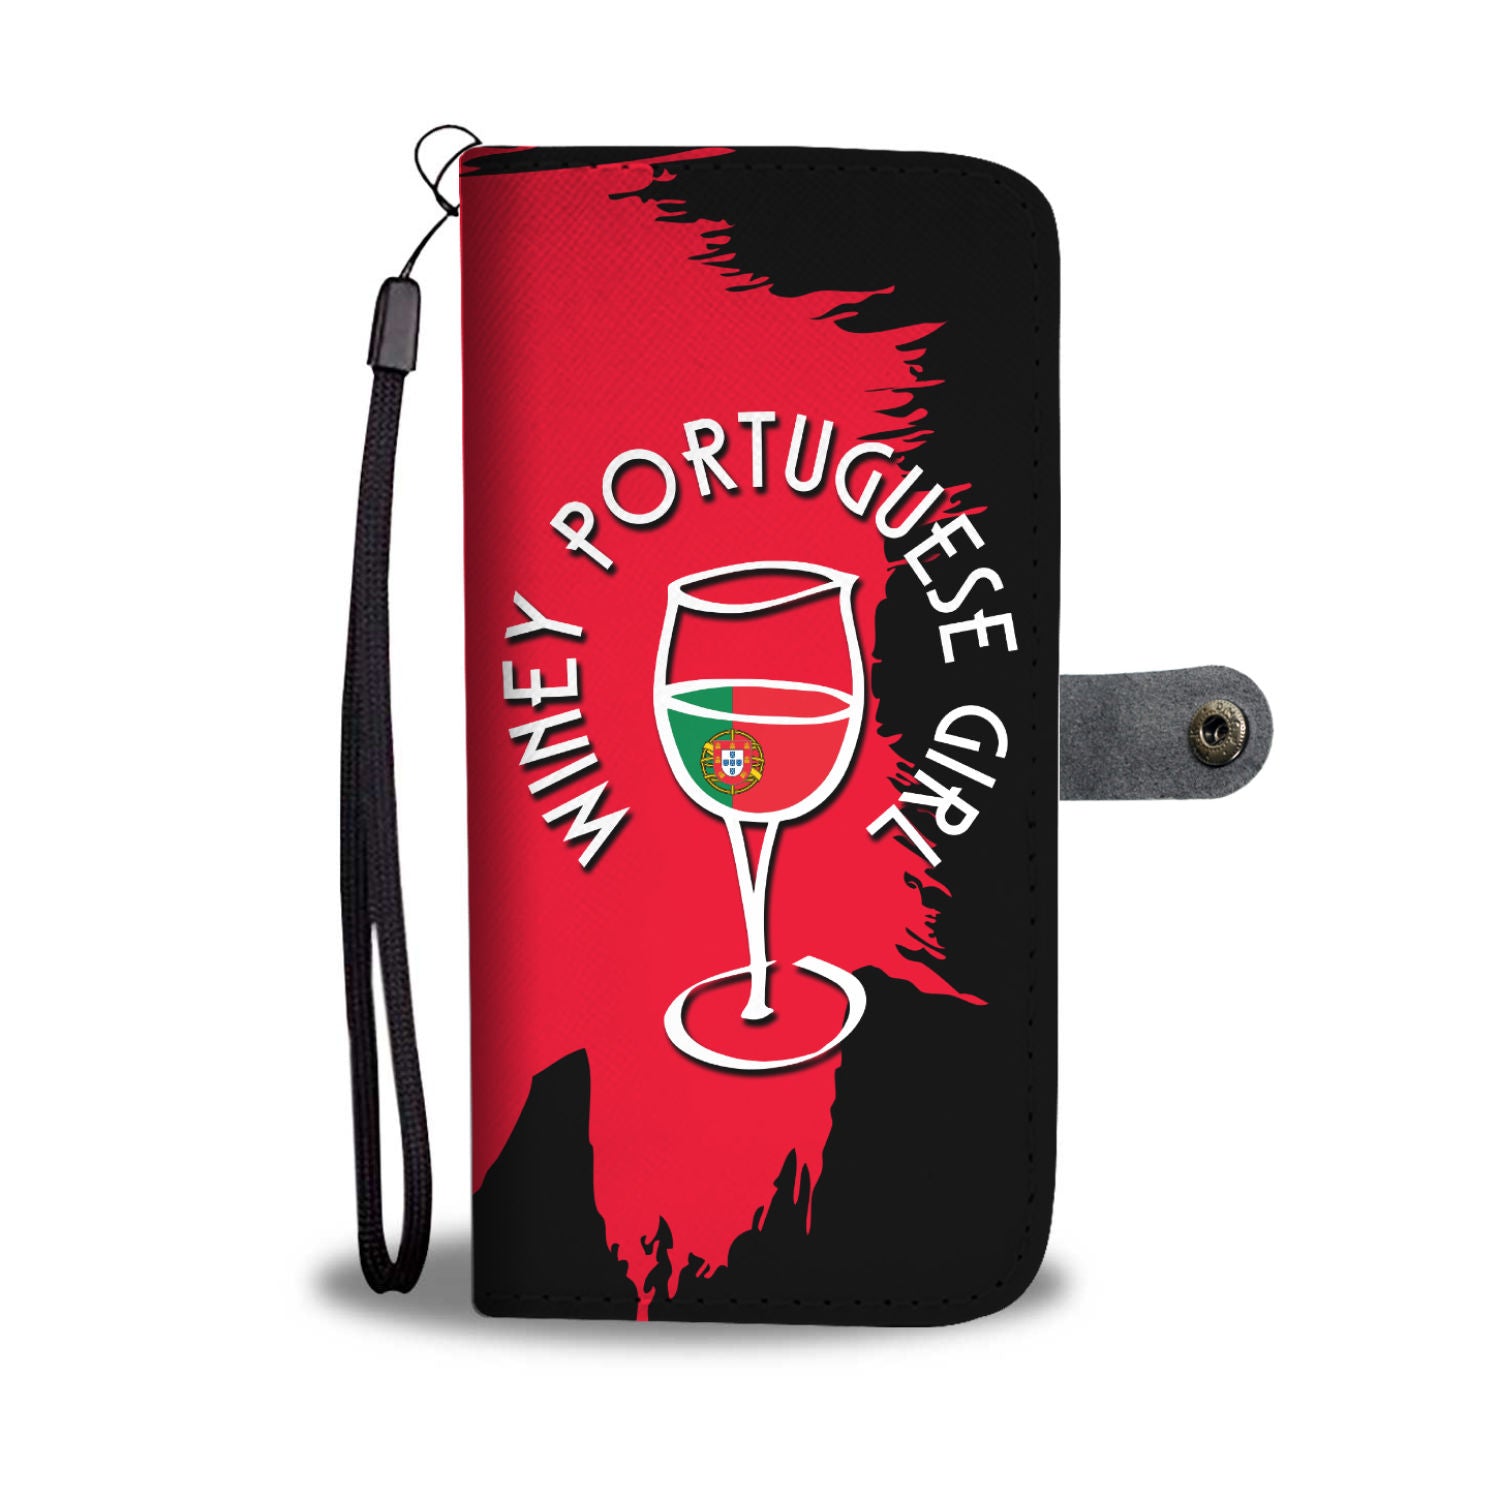 Winey Portuguese Girl Wallet Phone Case